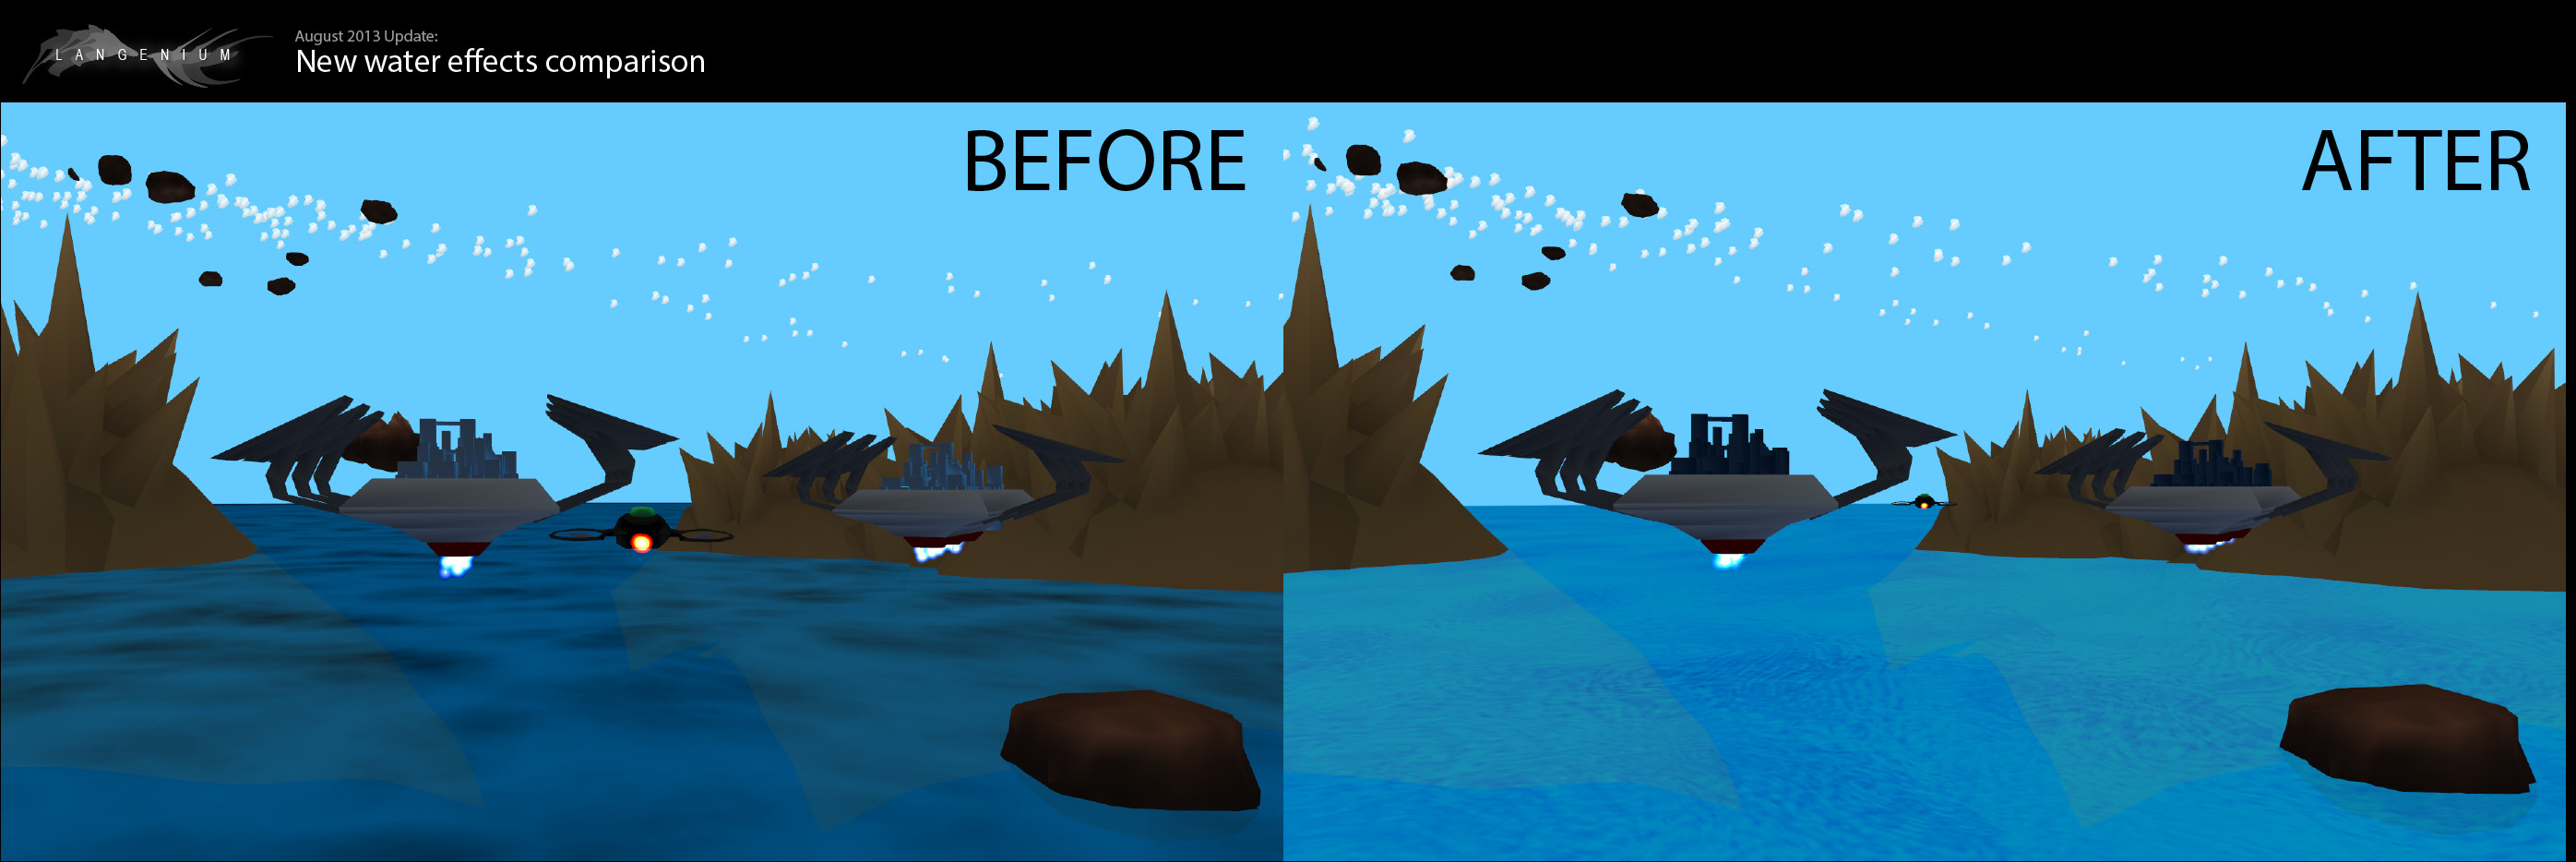 A comparison of old and new water shaders in the game's main scene.